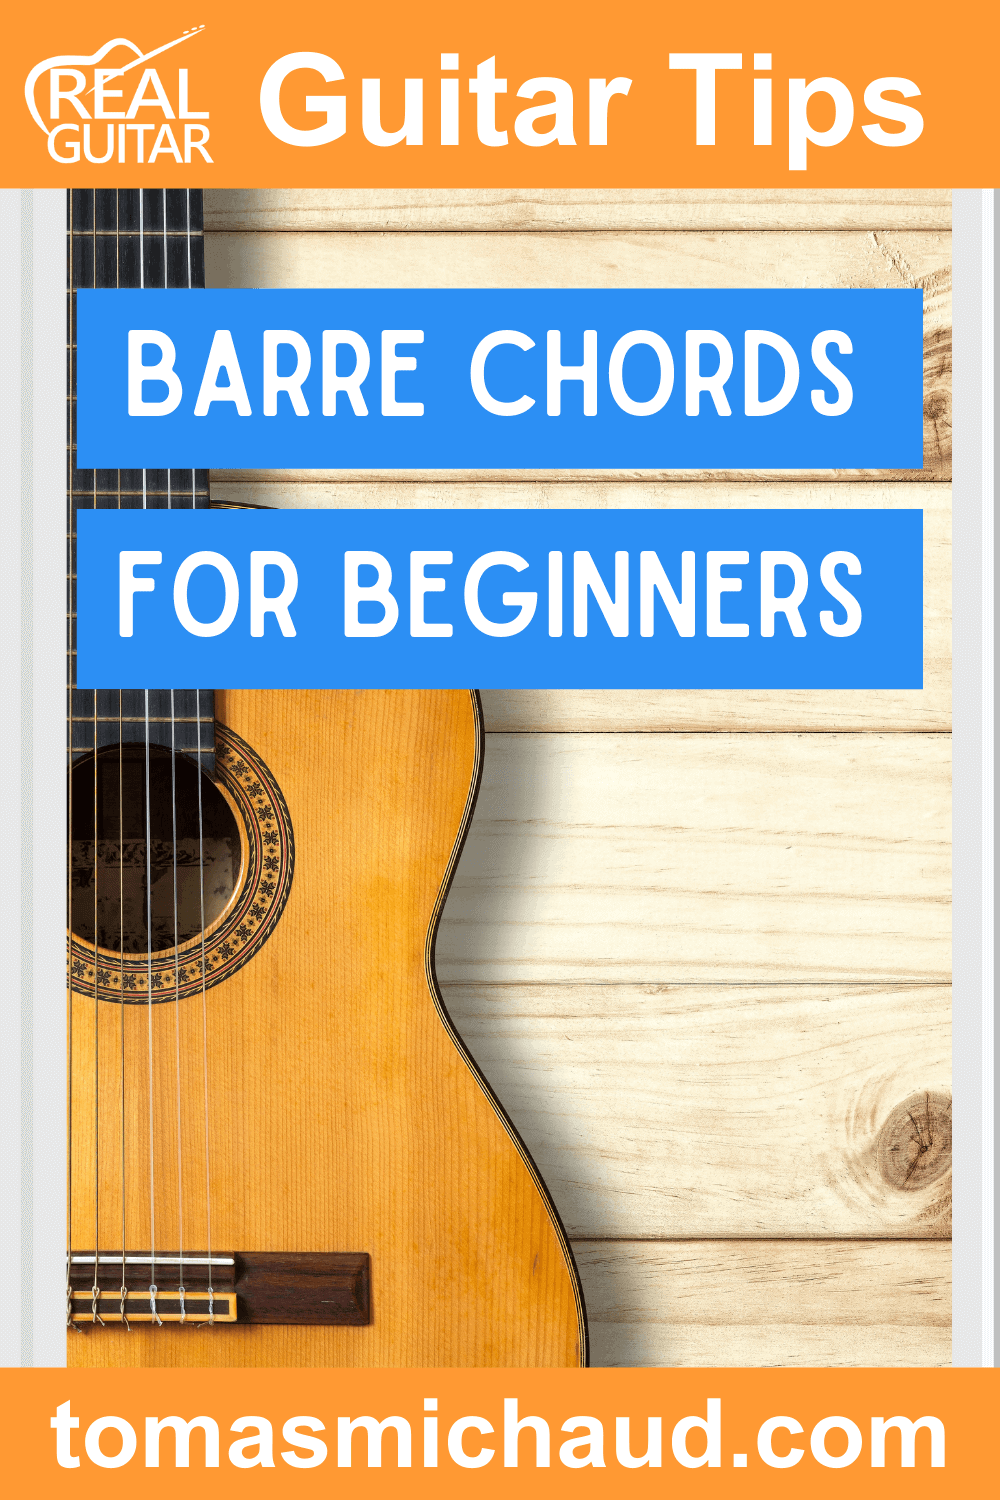 Barre Chords for Beginners